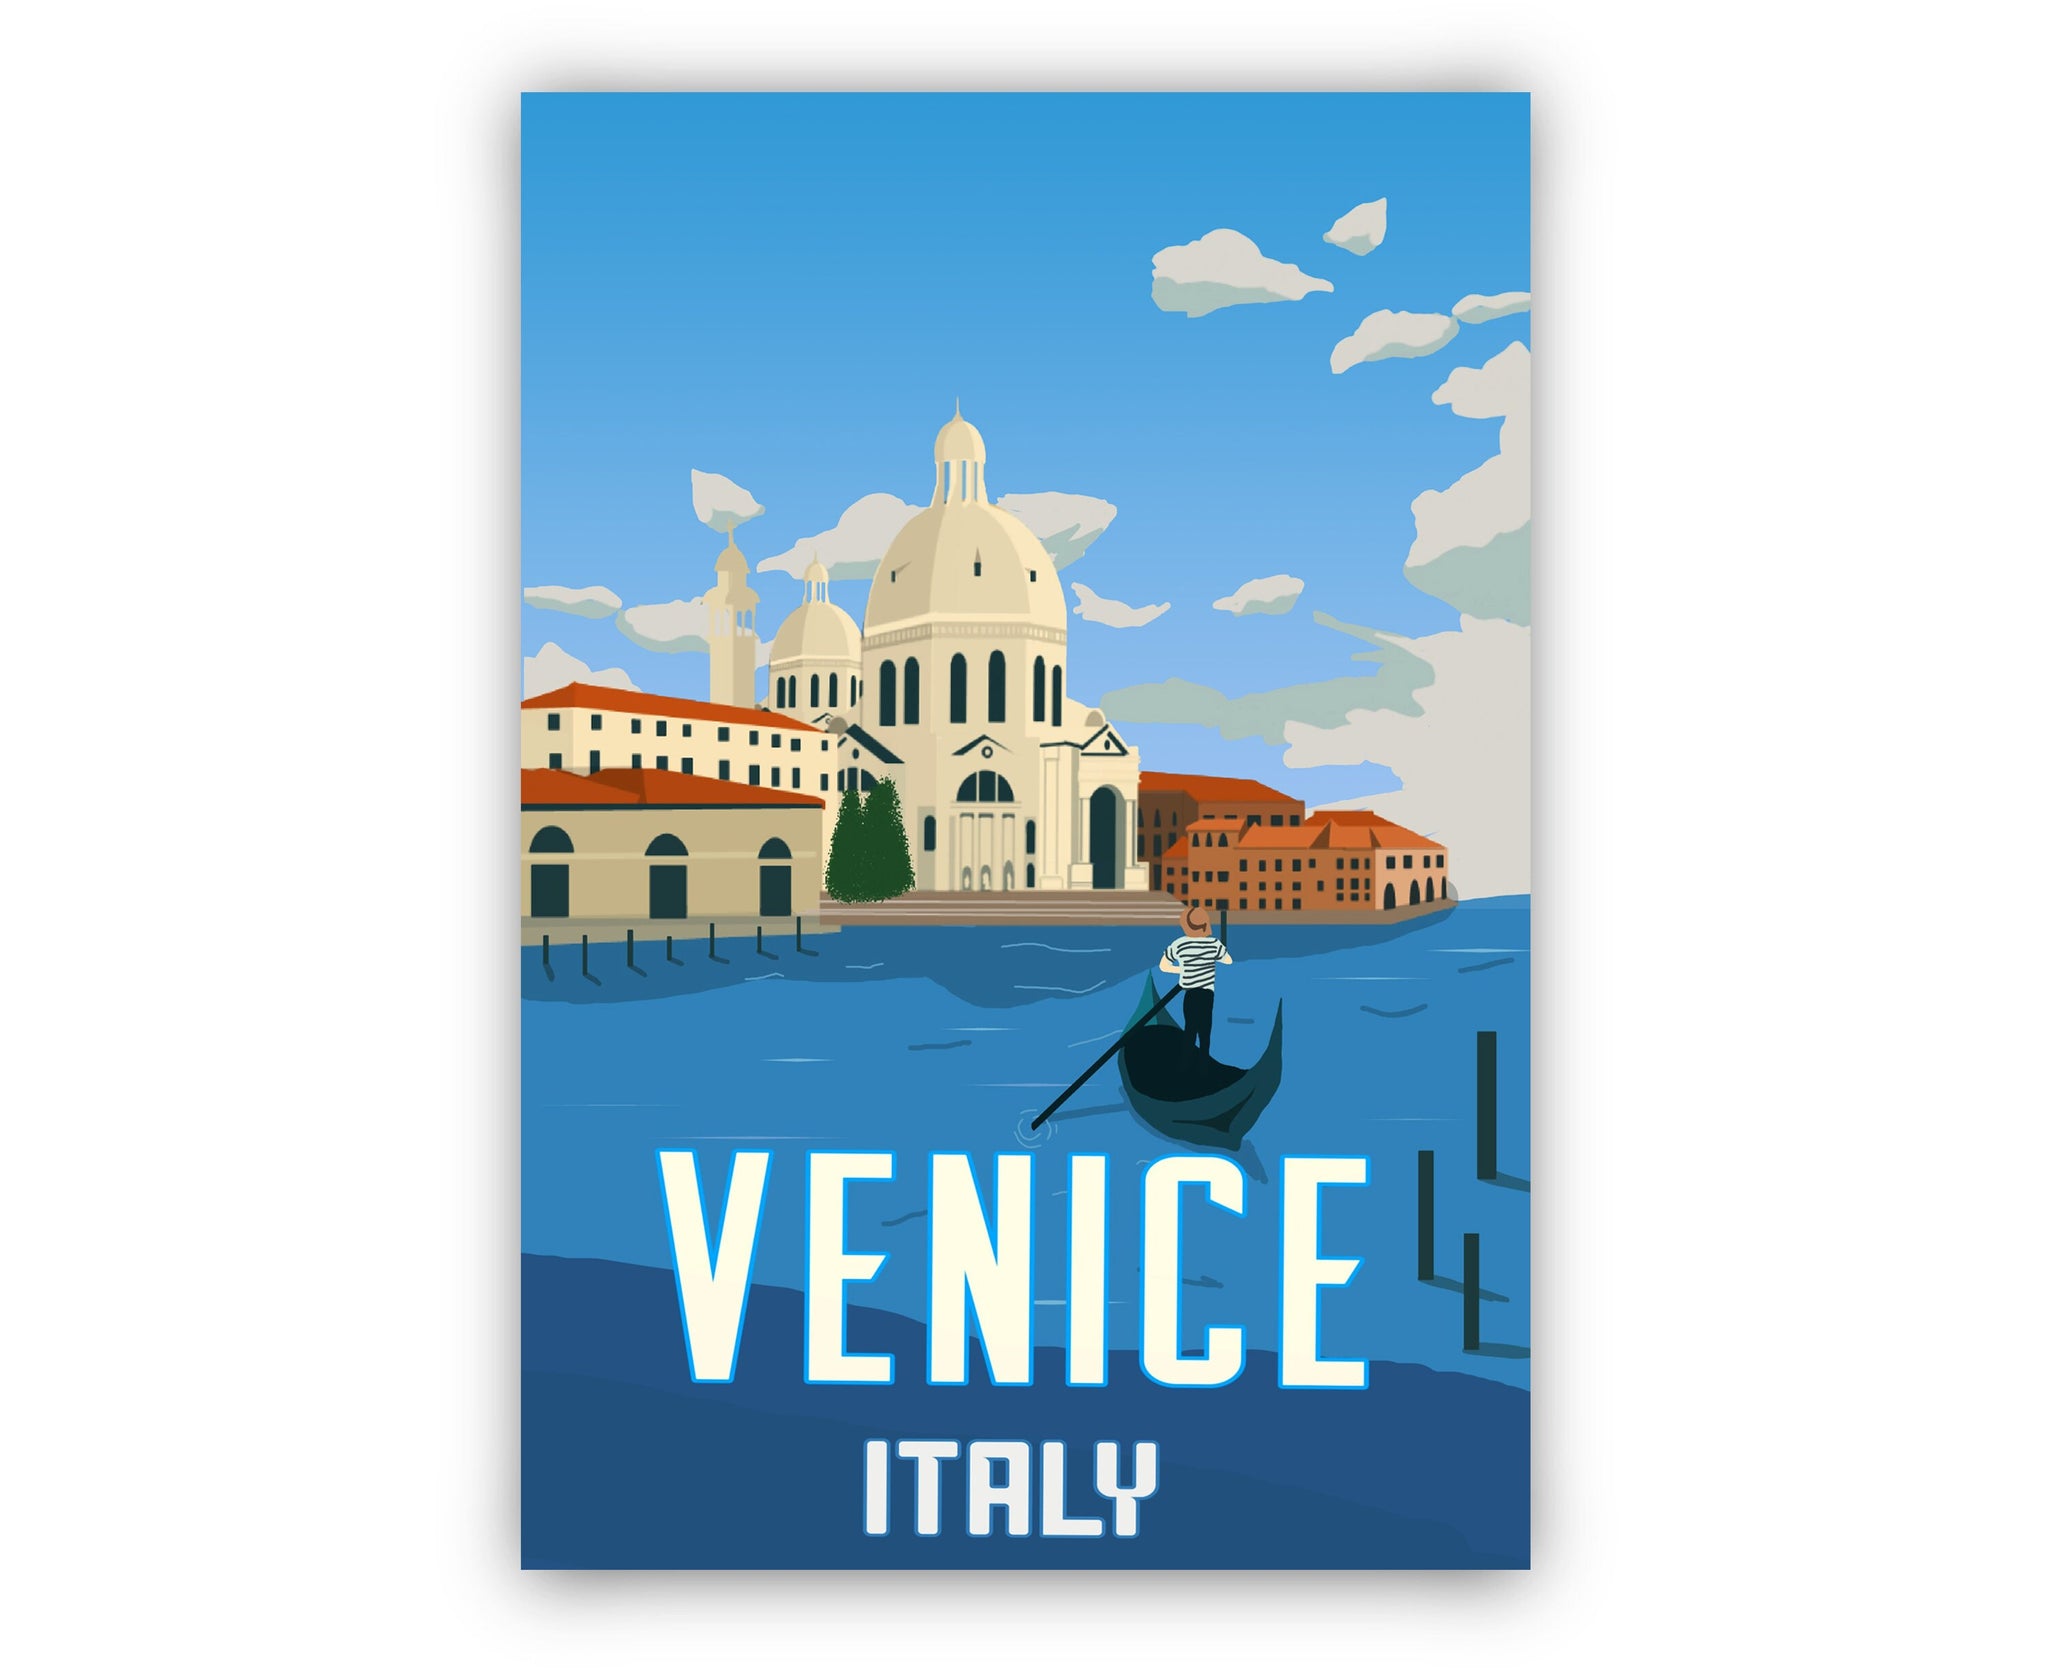 VENICE TRAVEL POSTER, Venice cityscape and landmark poster wall art, Home wall art, Office wall decoration, Italy Venice poster print